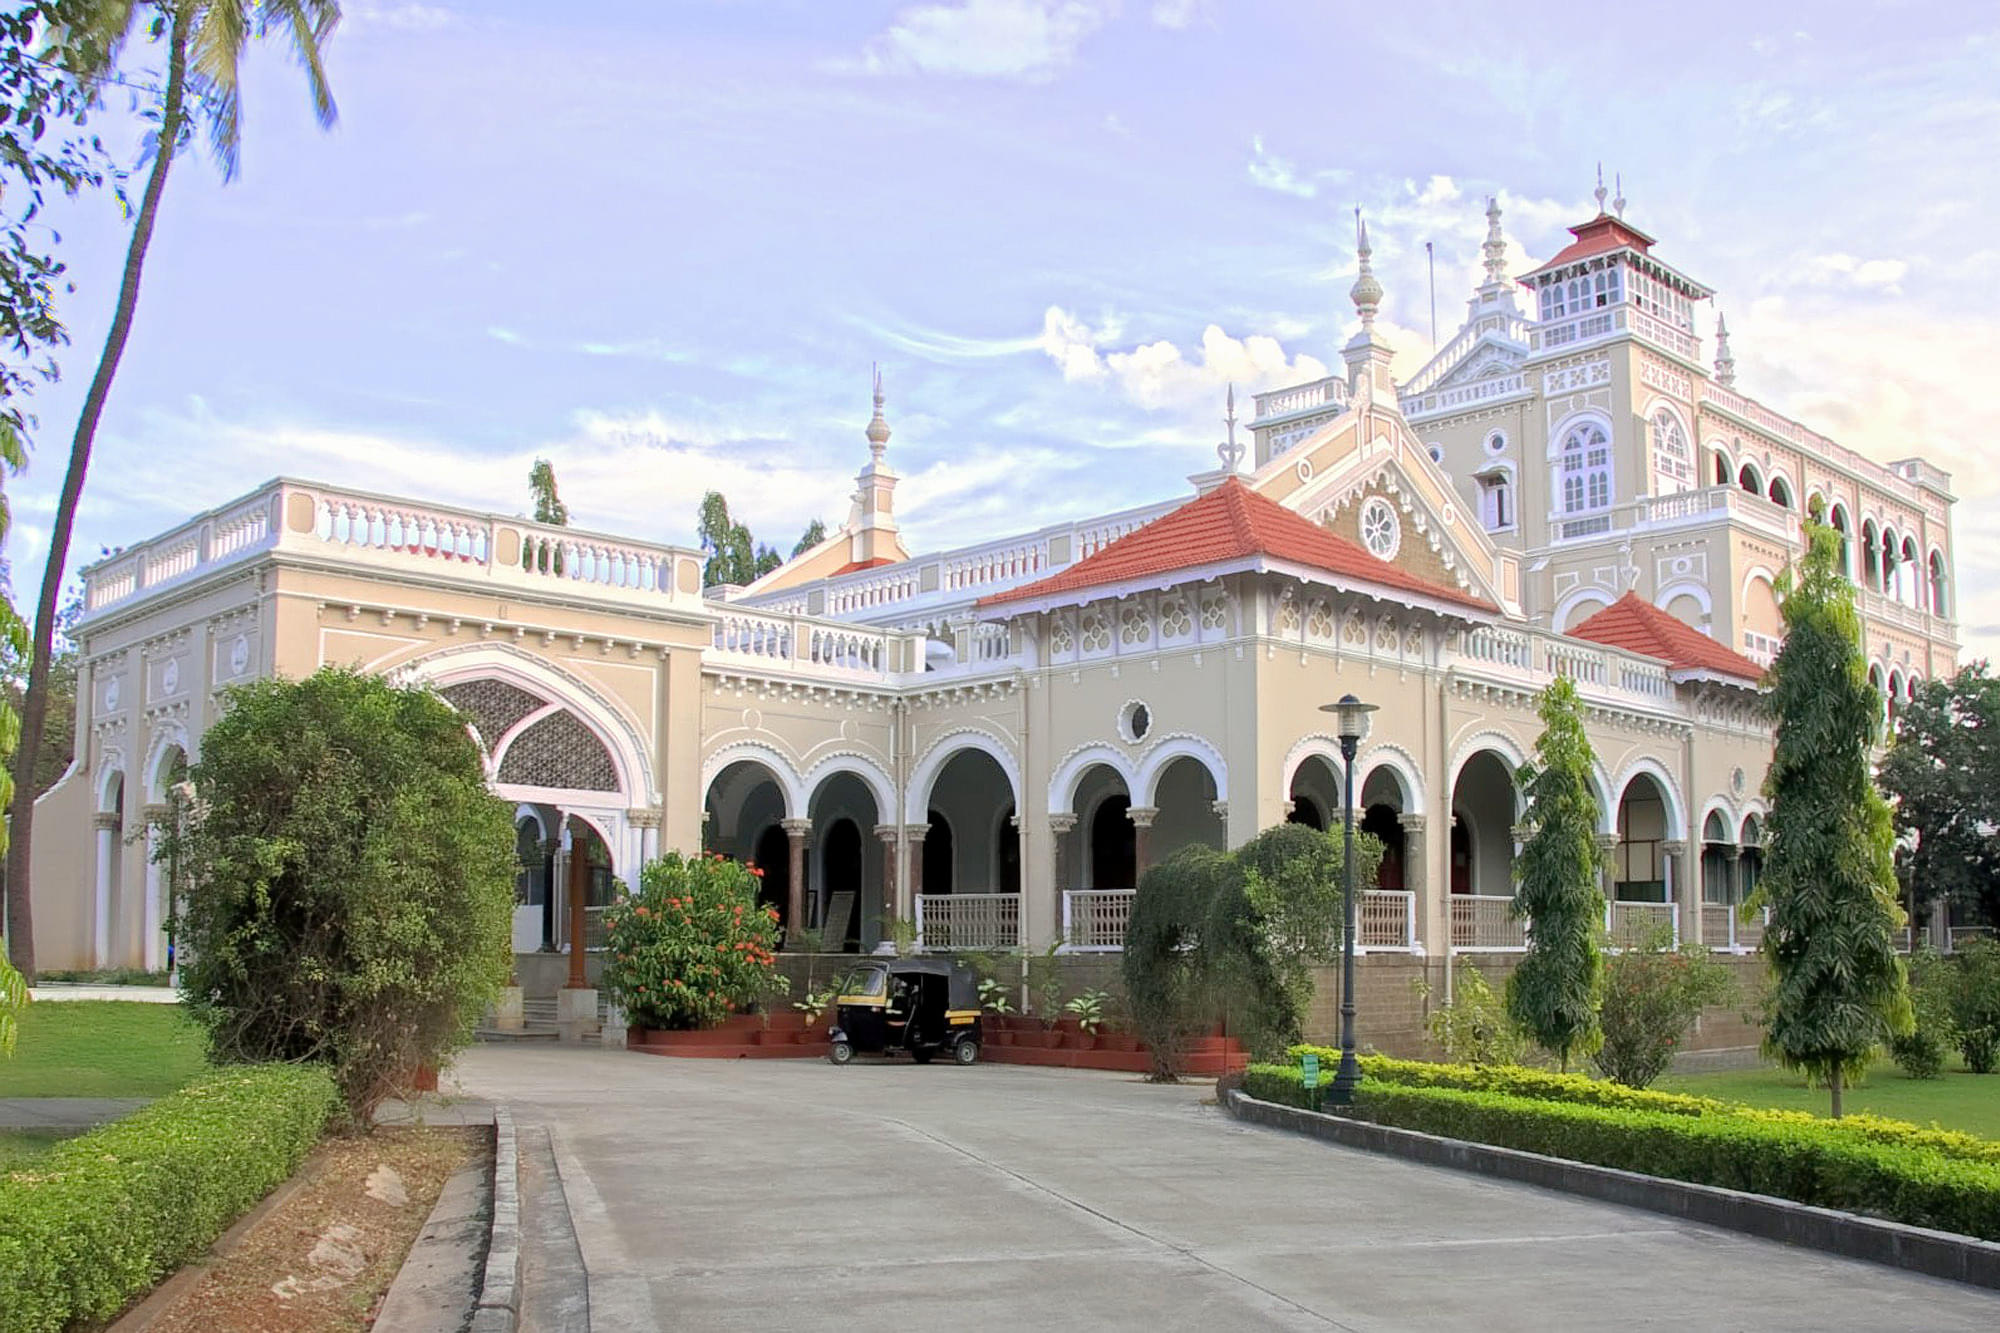 Aga Khan Palace Overview